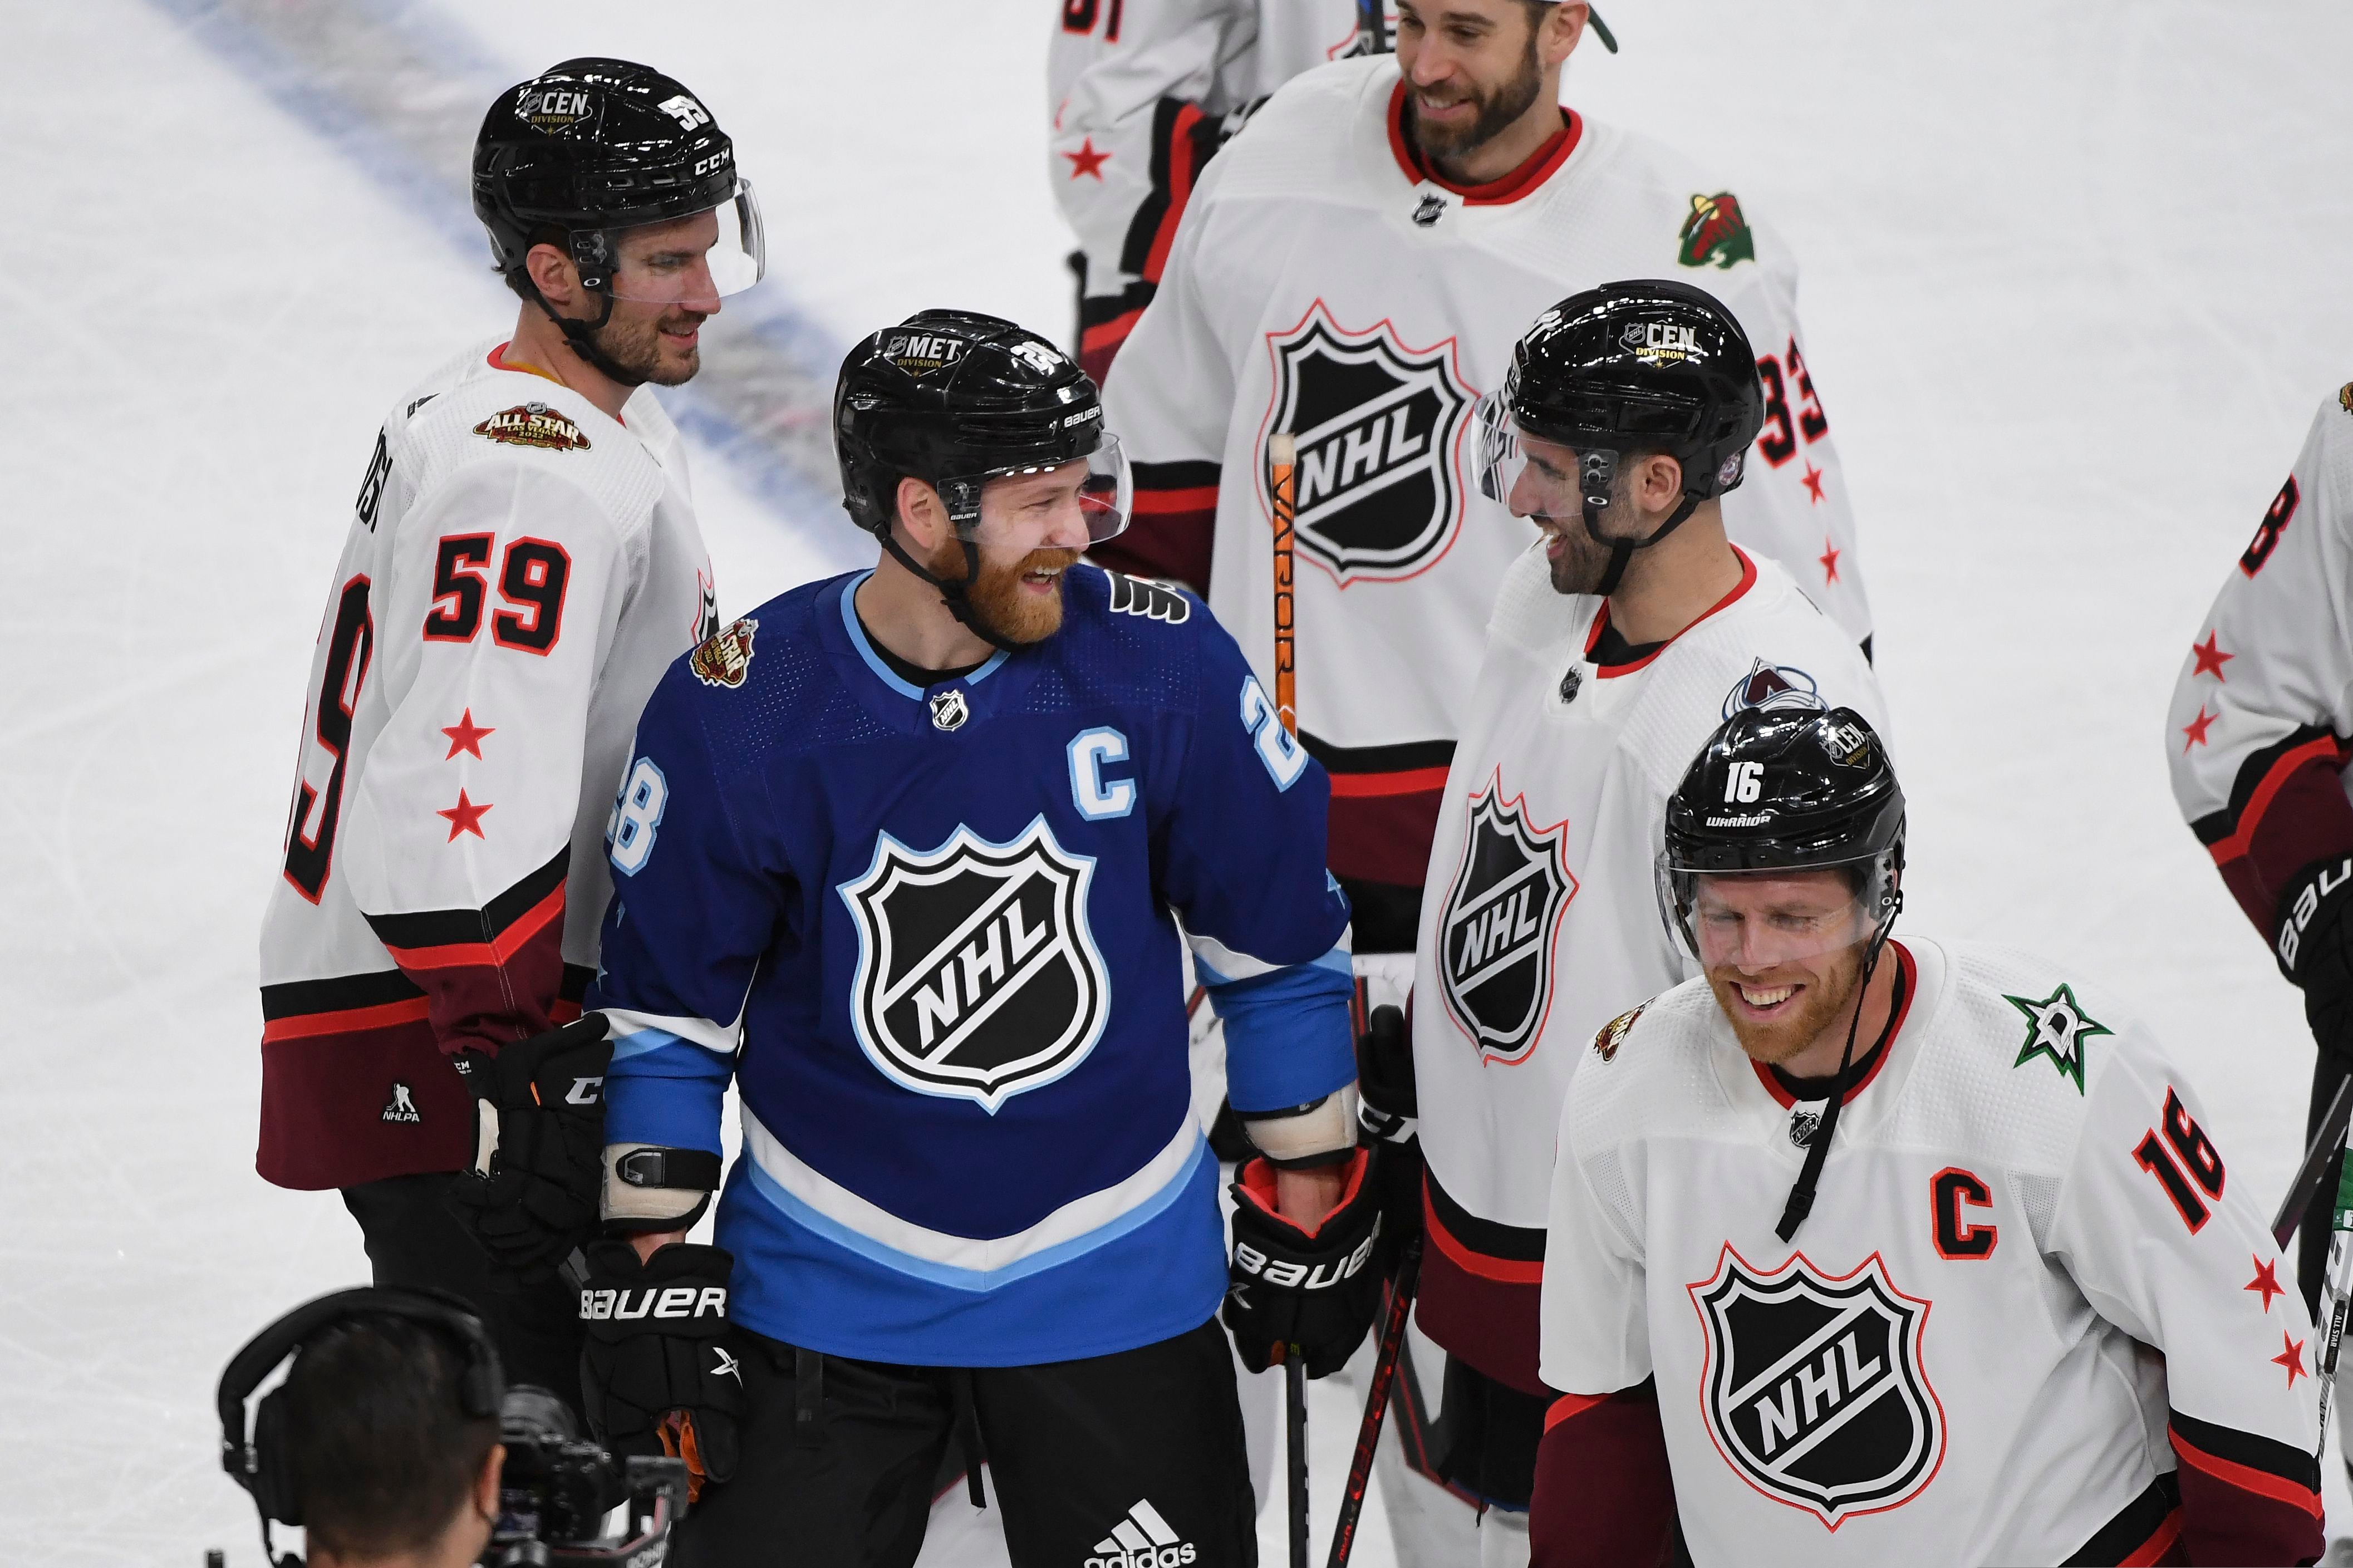 NHL All-Star Weekend: News, Format, & Rosters